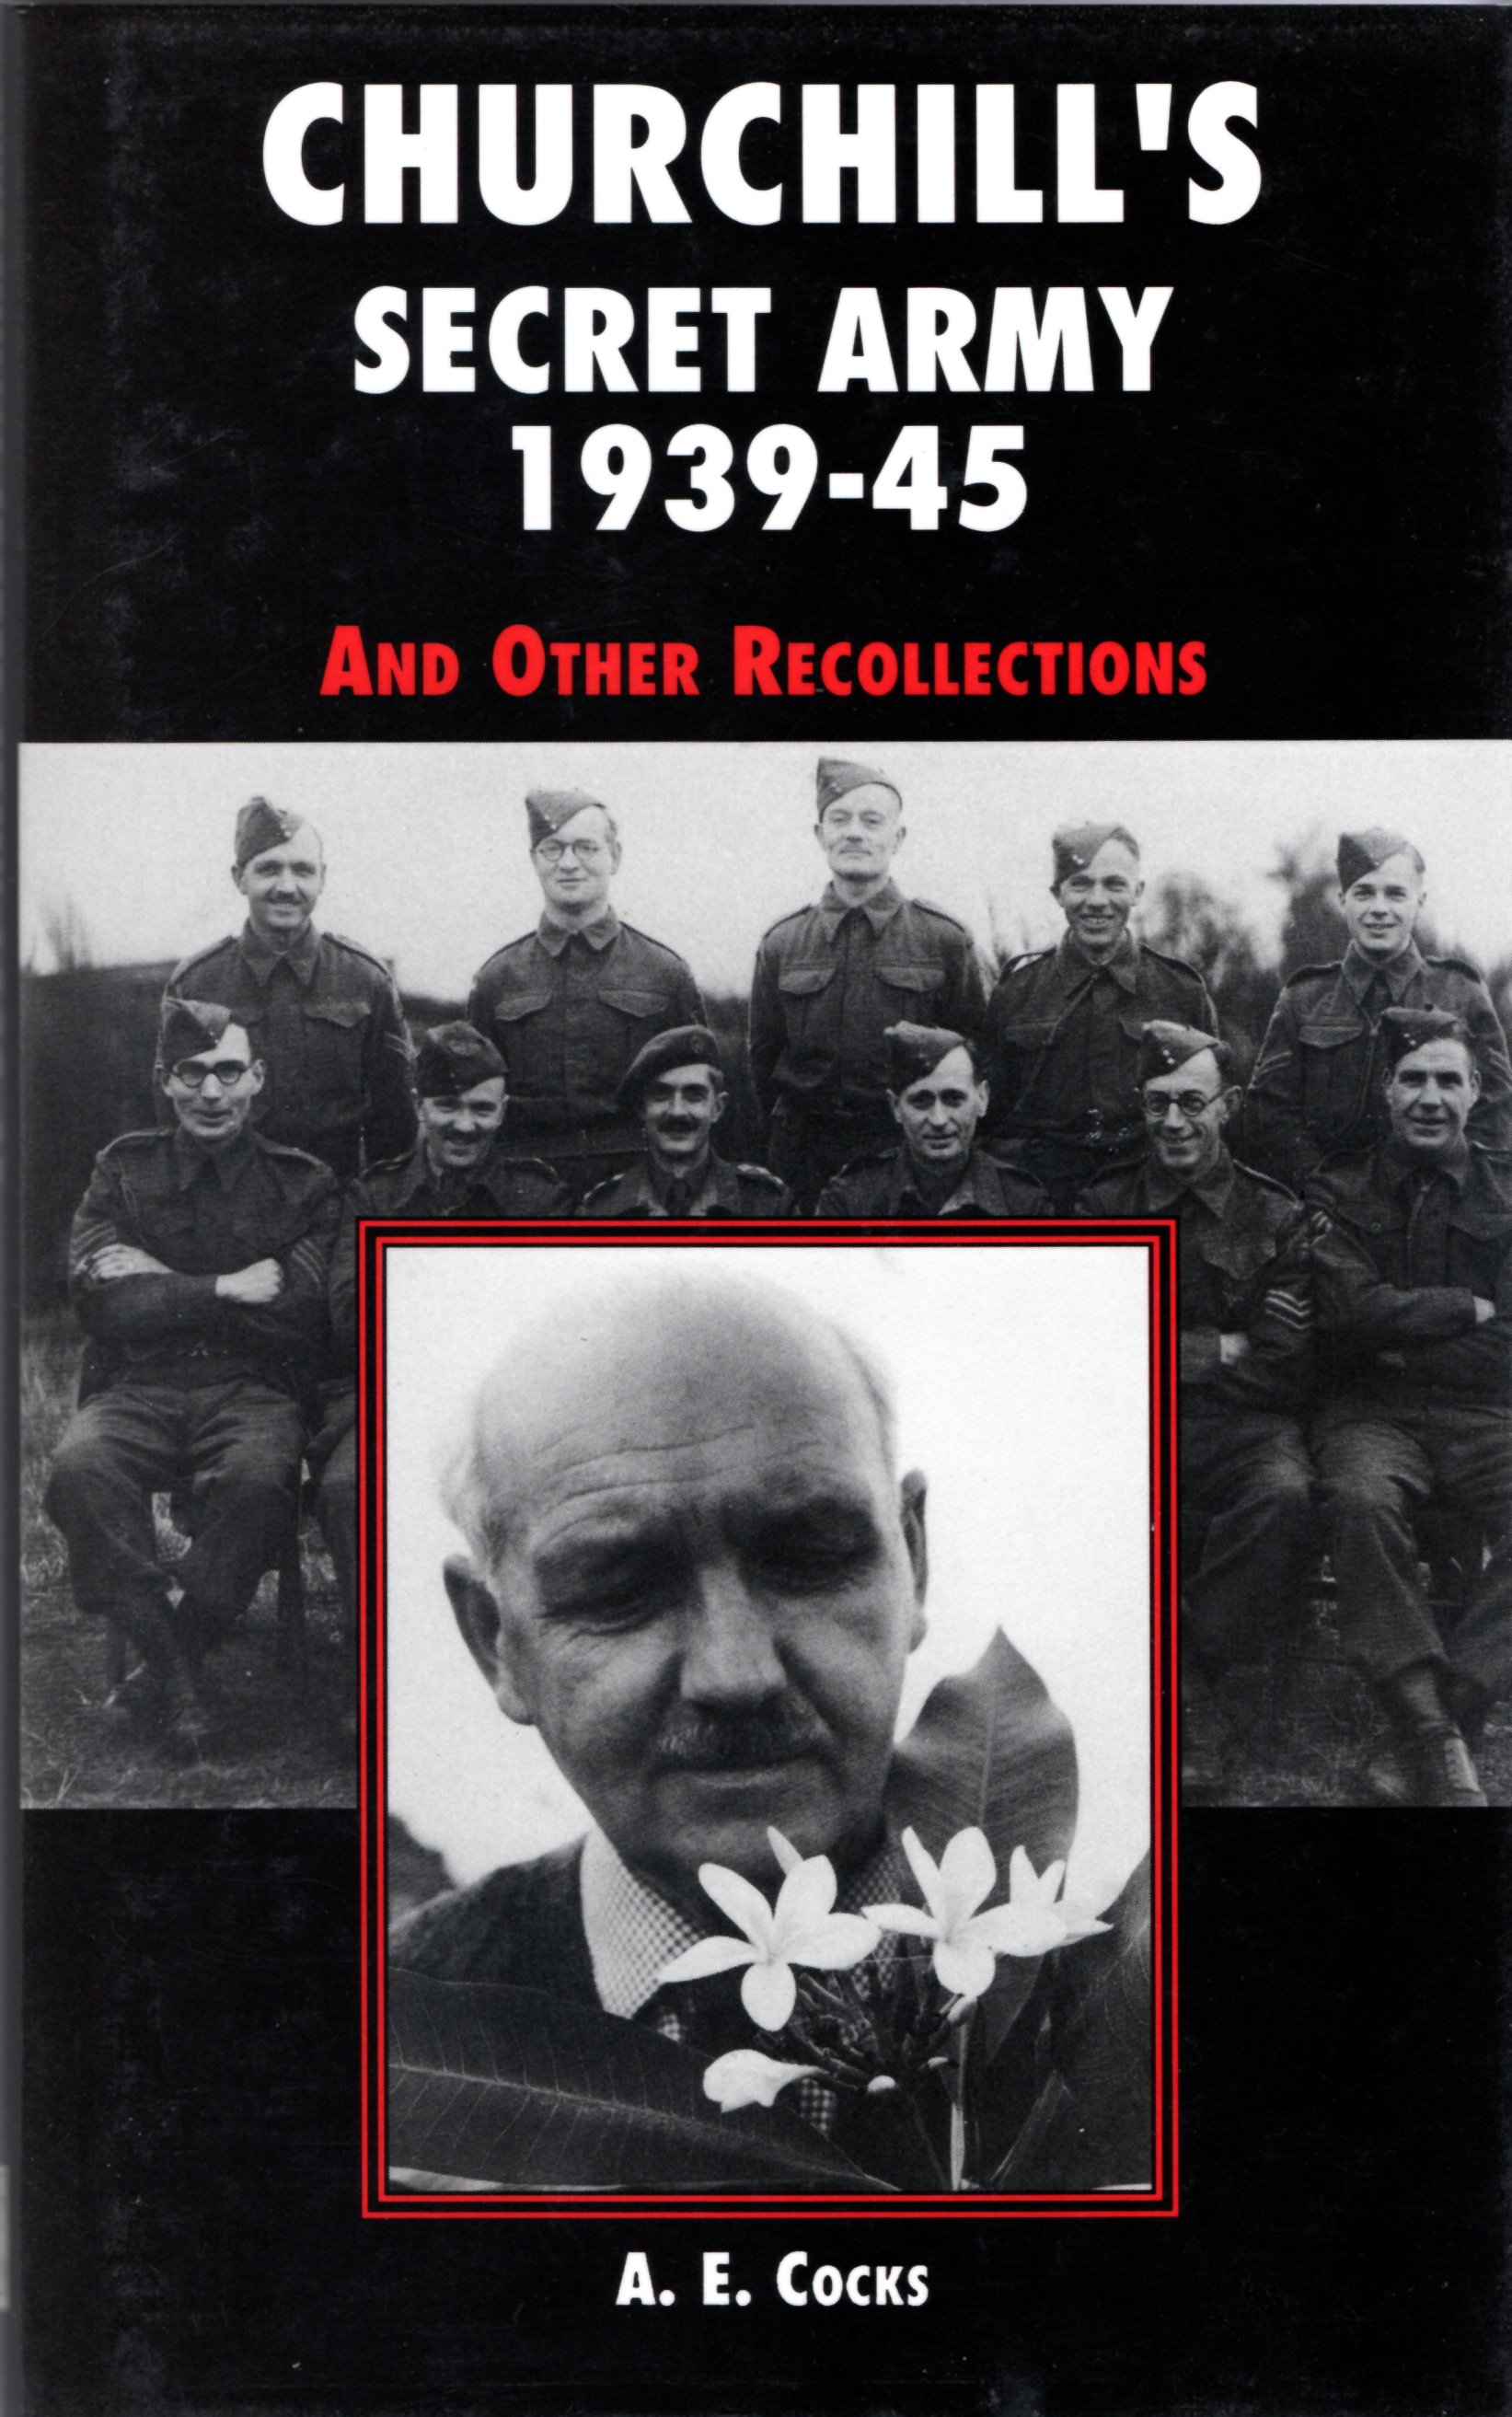 Unearthing churchill s secret army the official list of soe casualties